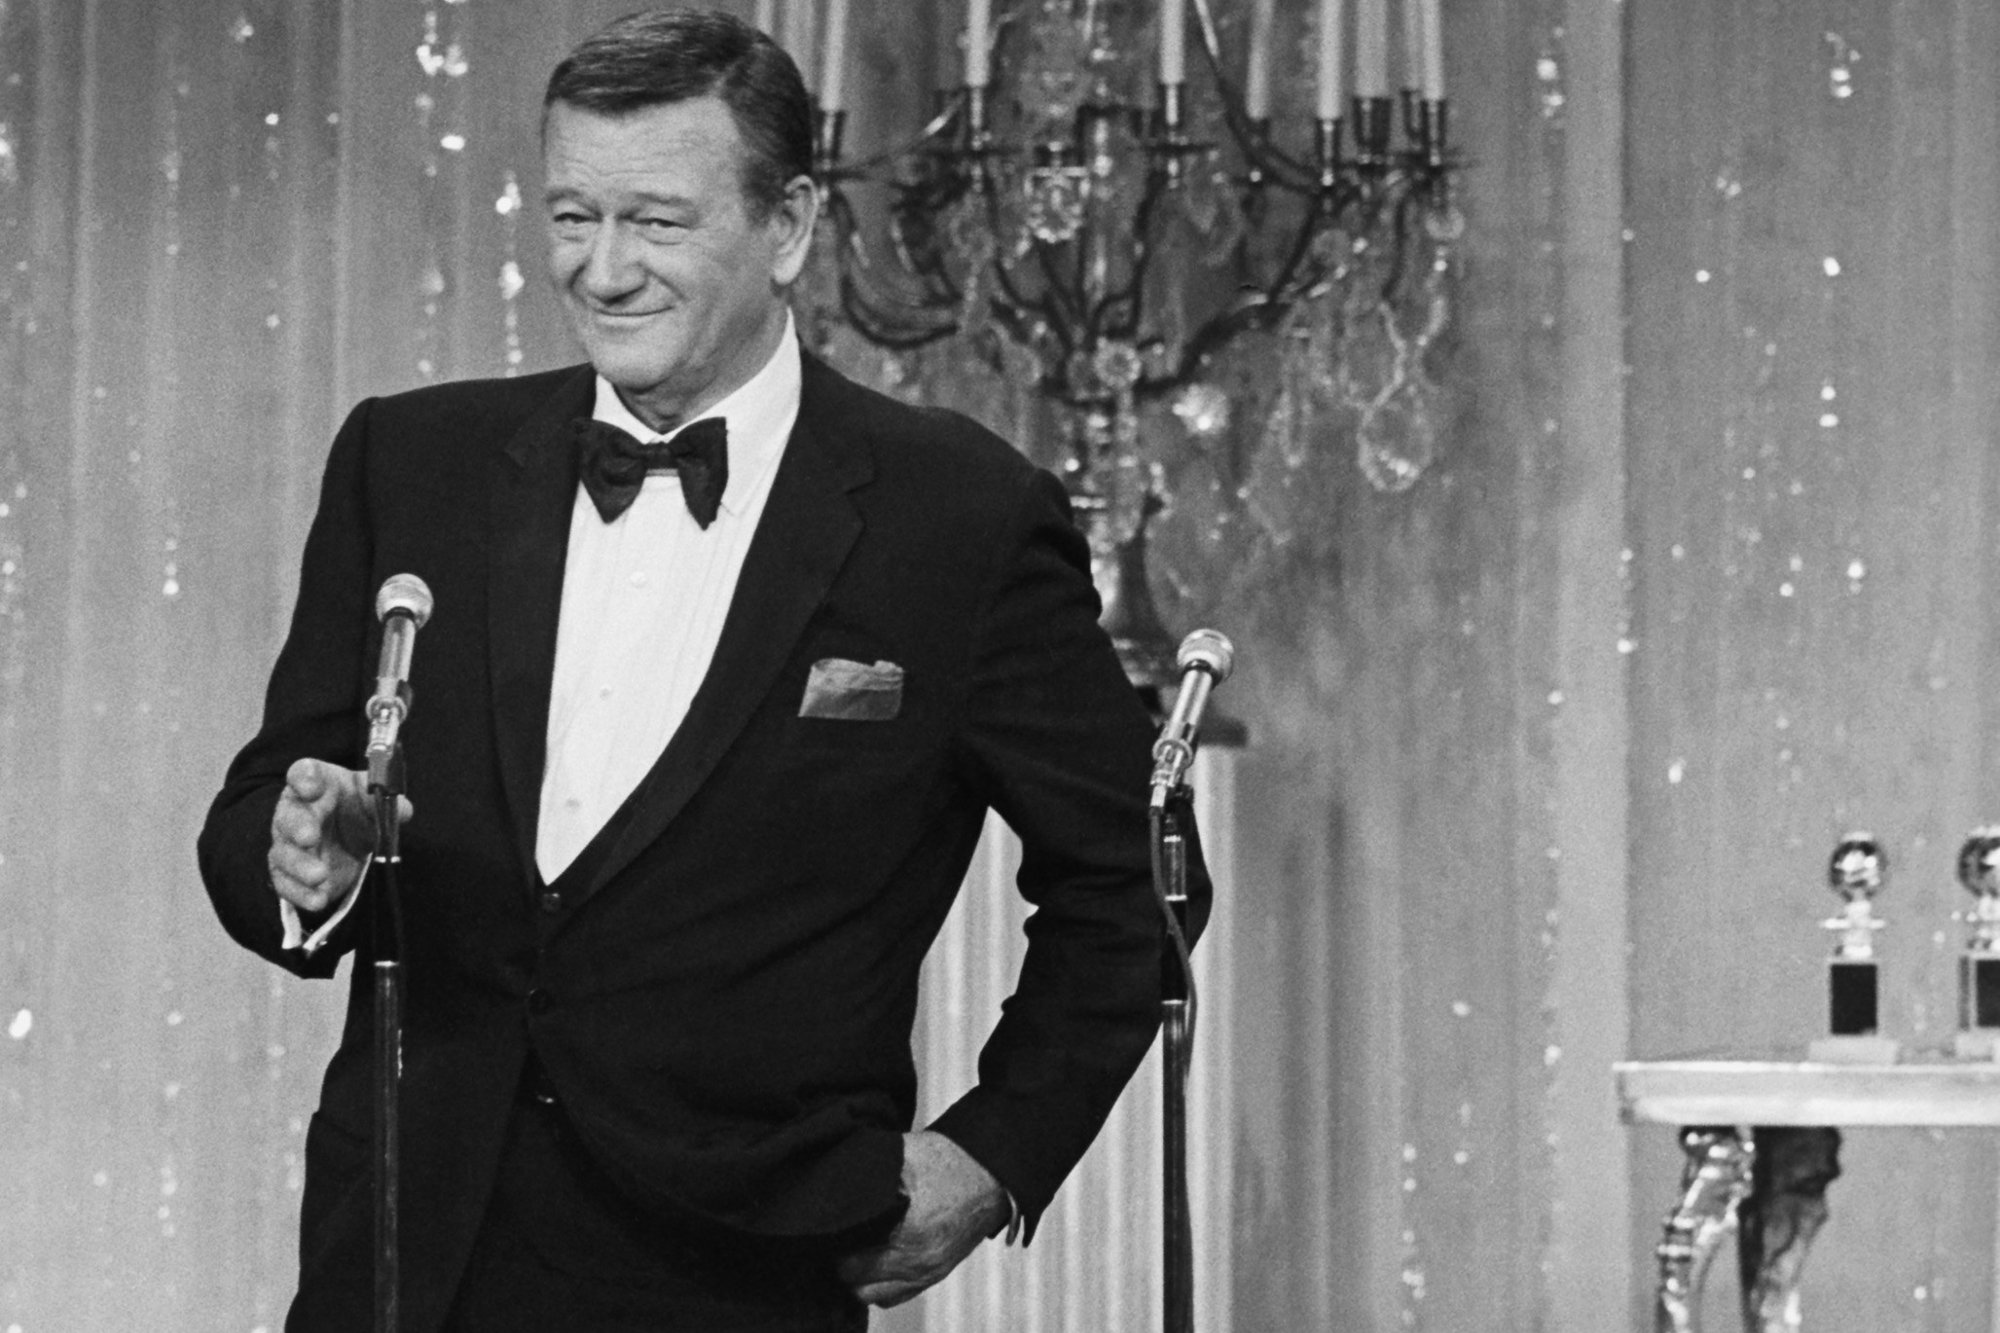 John Wayne at the Golden Globes in a black-and-white picture wearing a tux, holding onto the microphone